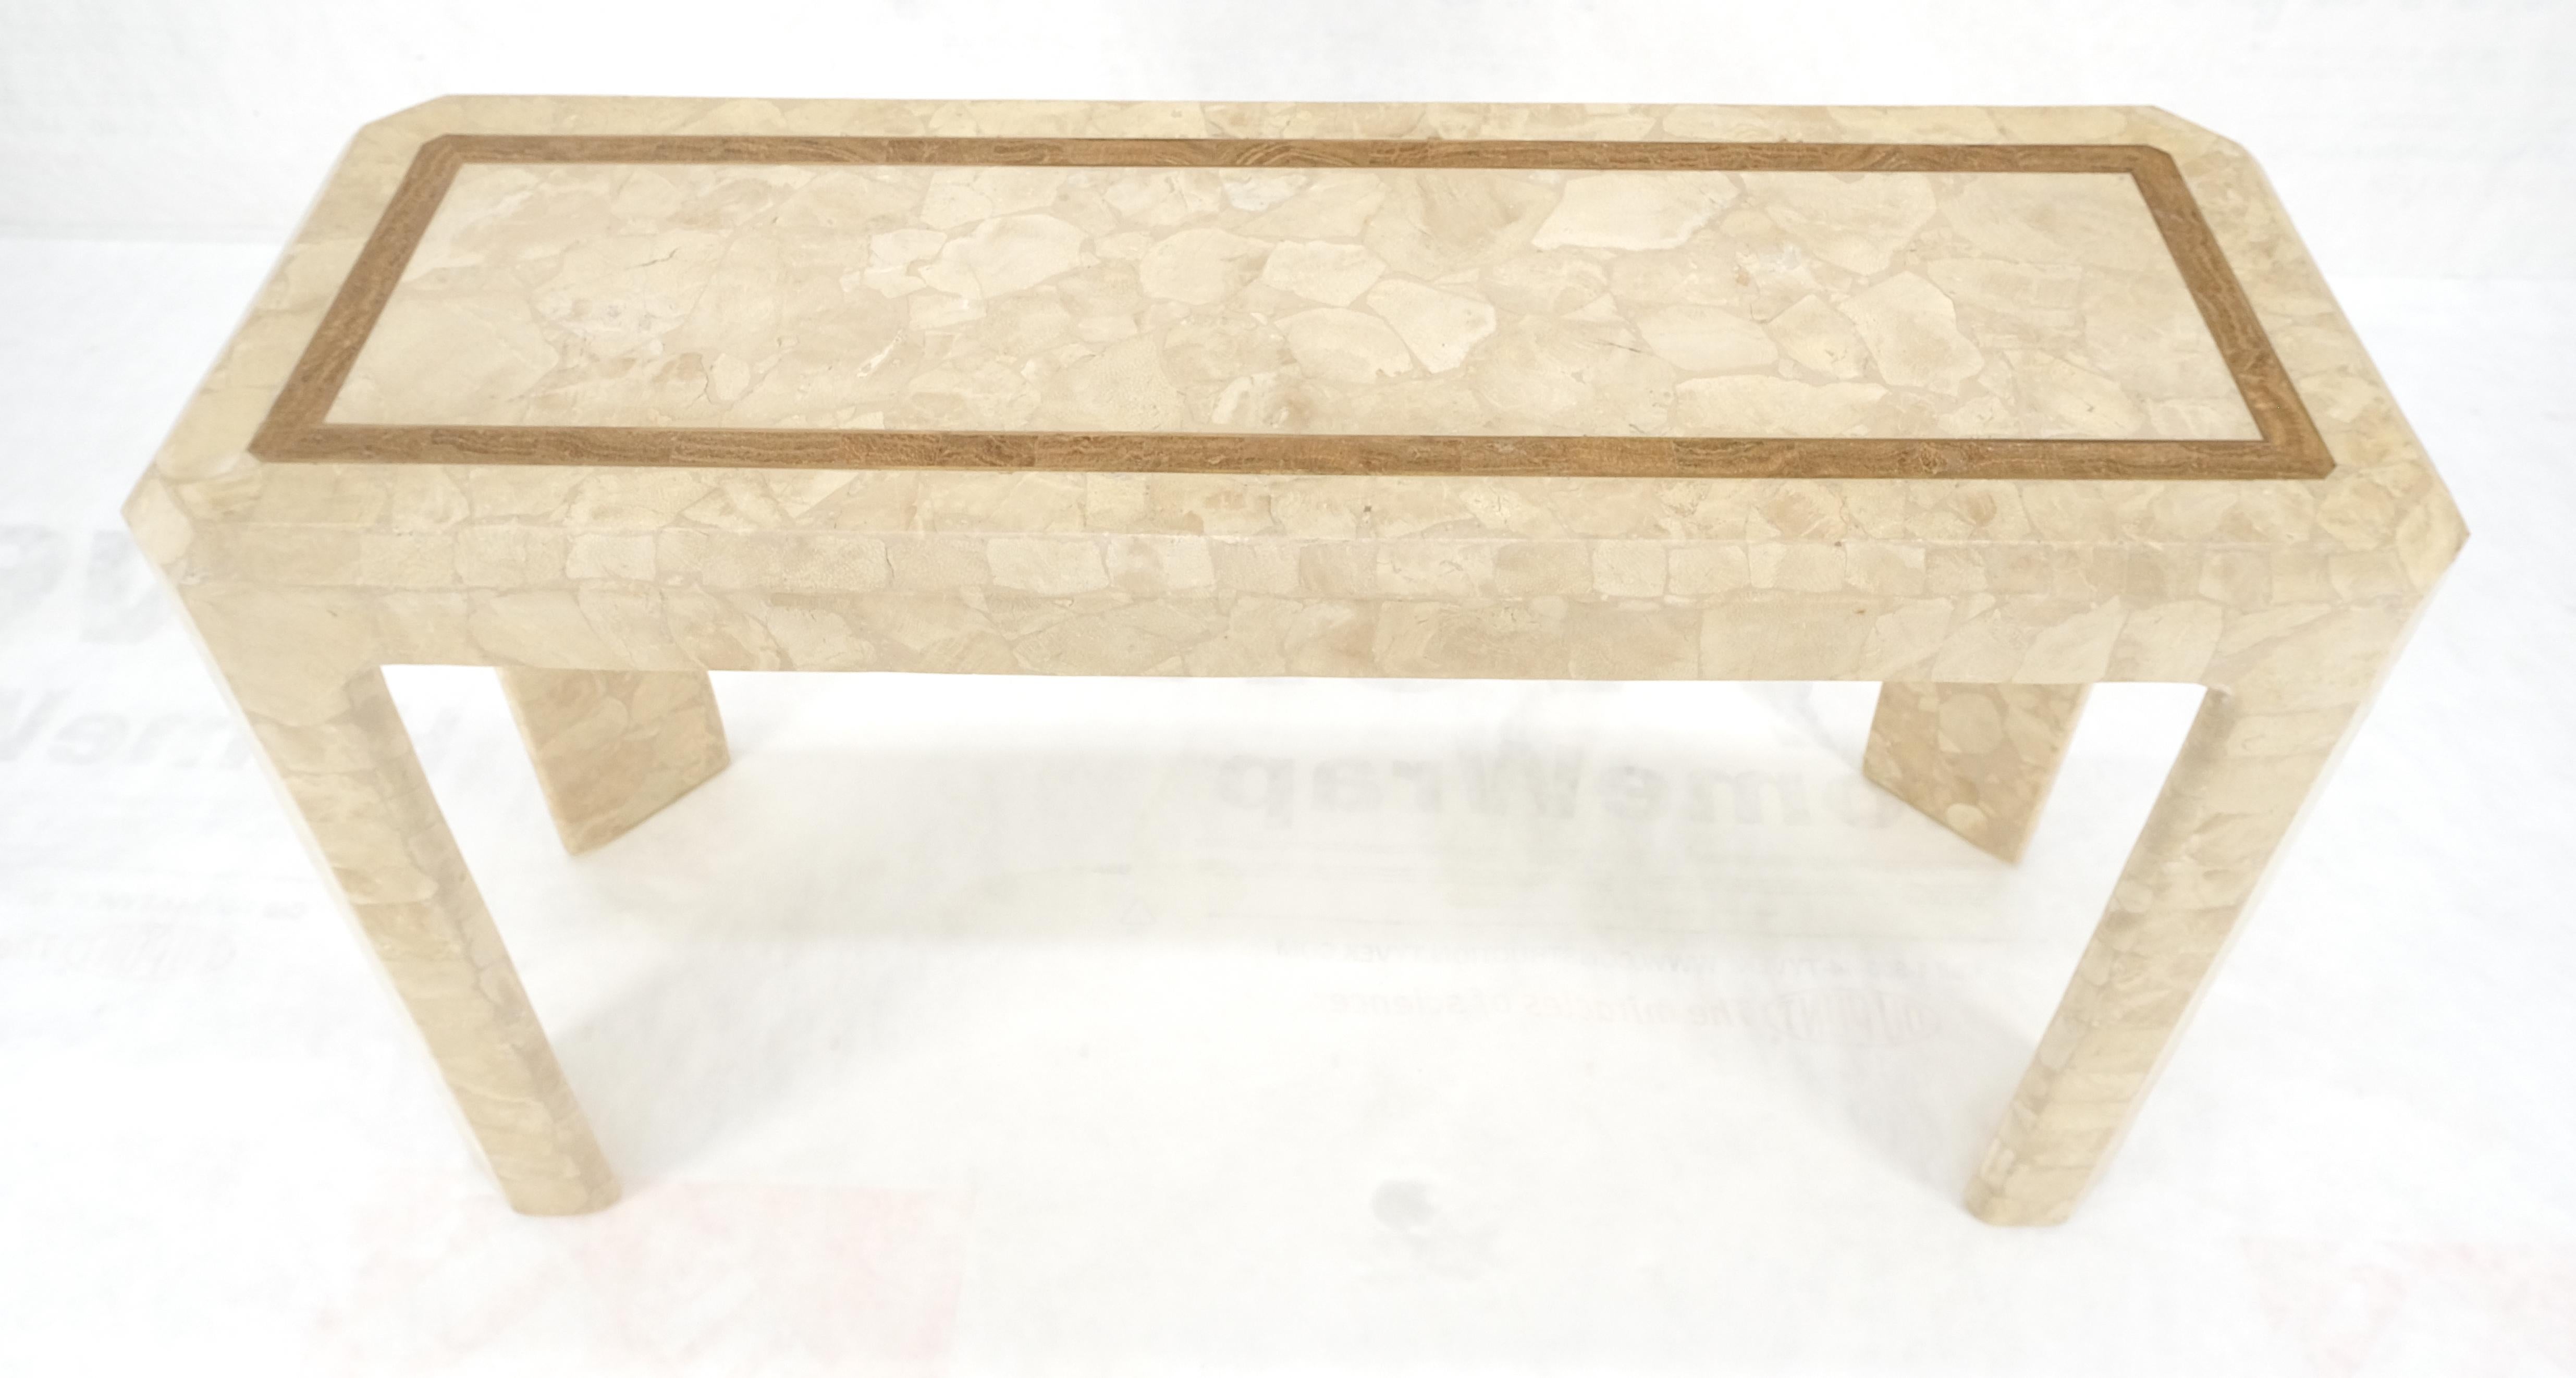 Unknown Tessellated Travertine Inlayed Top Console Sofa Table Mid Century Modern MINT! For Sale